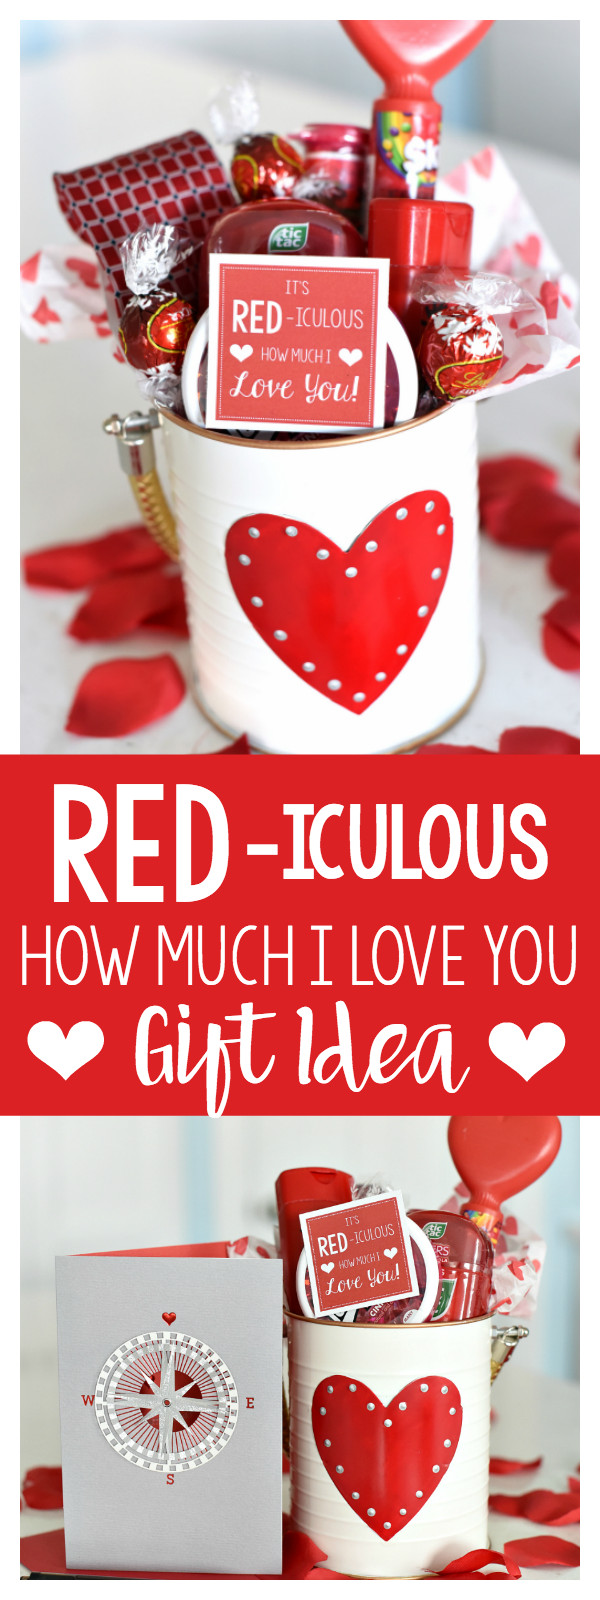 Free Valentine Gift Ideas
 Cute Valentine s Day Gift Idea RED iculous Basket